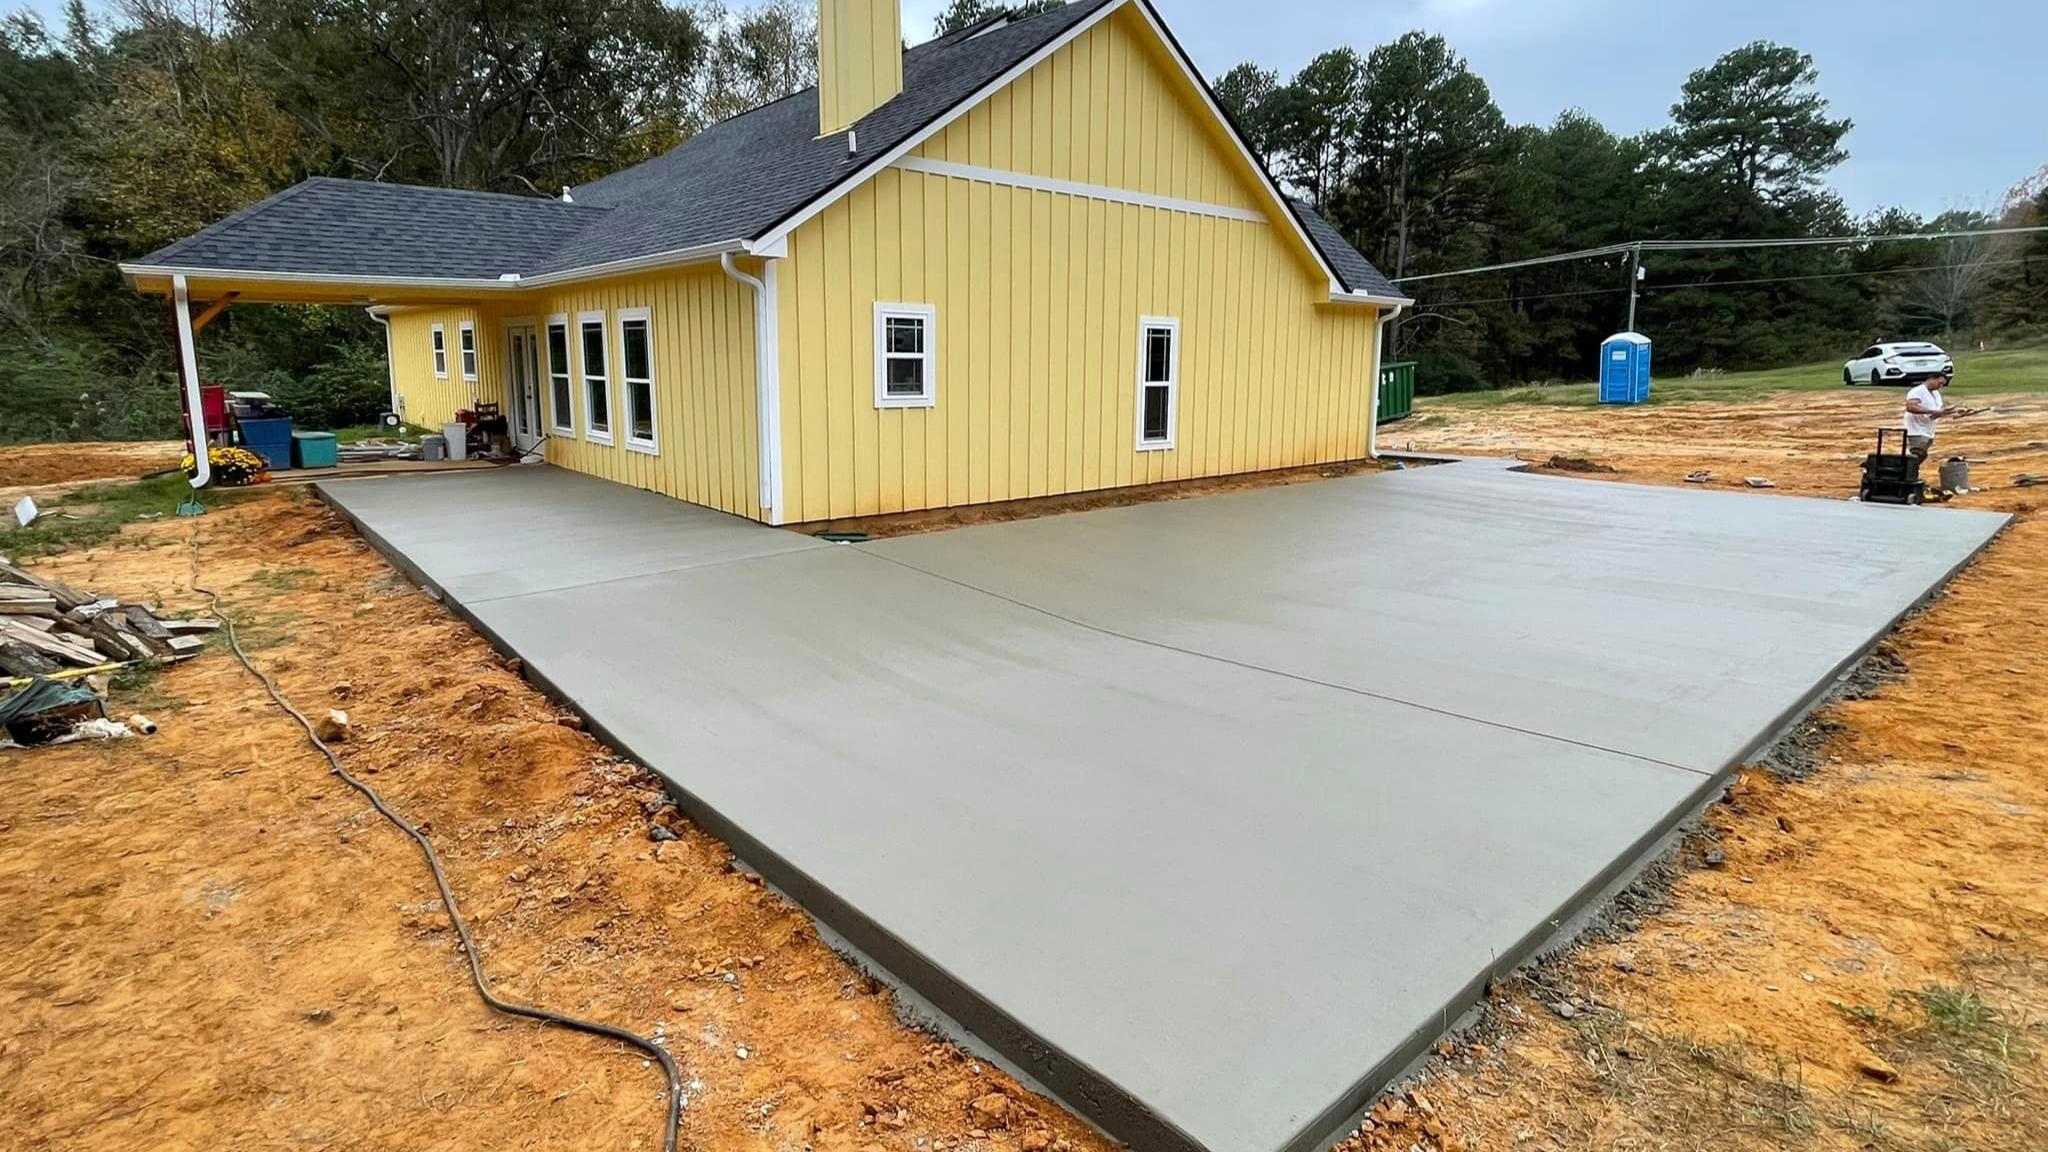 At ETX Concrete Works, we take pride in our professional approach to concrete work. Our commitment to excellence, coupled with our skilled craftsmen, guarantees that every project we undertake is completed to the highest standards. From concept to completion, we provide reliable, professional concrete solutions for your residential and commercial needs.